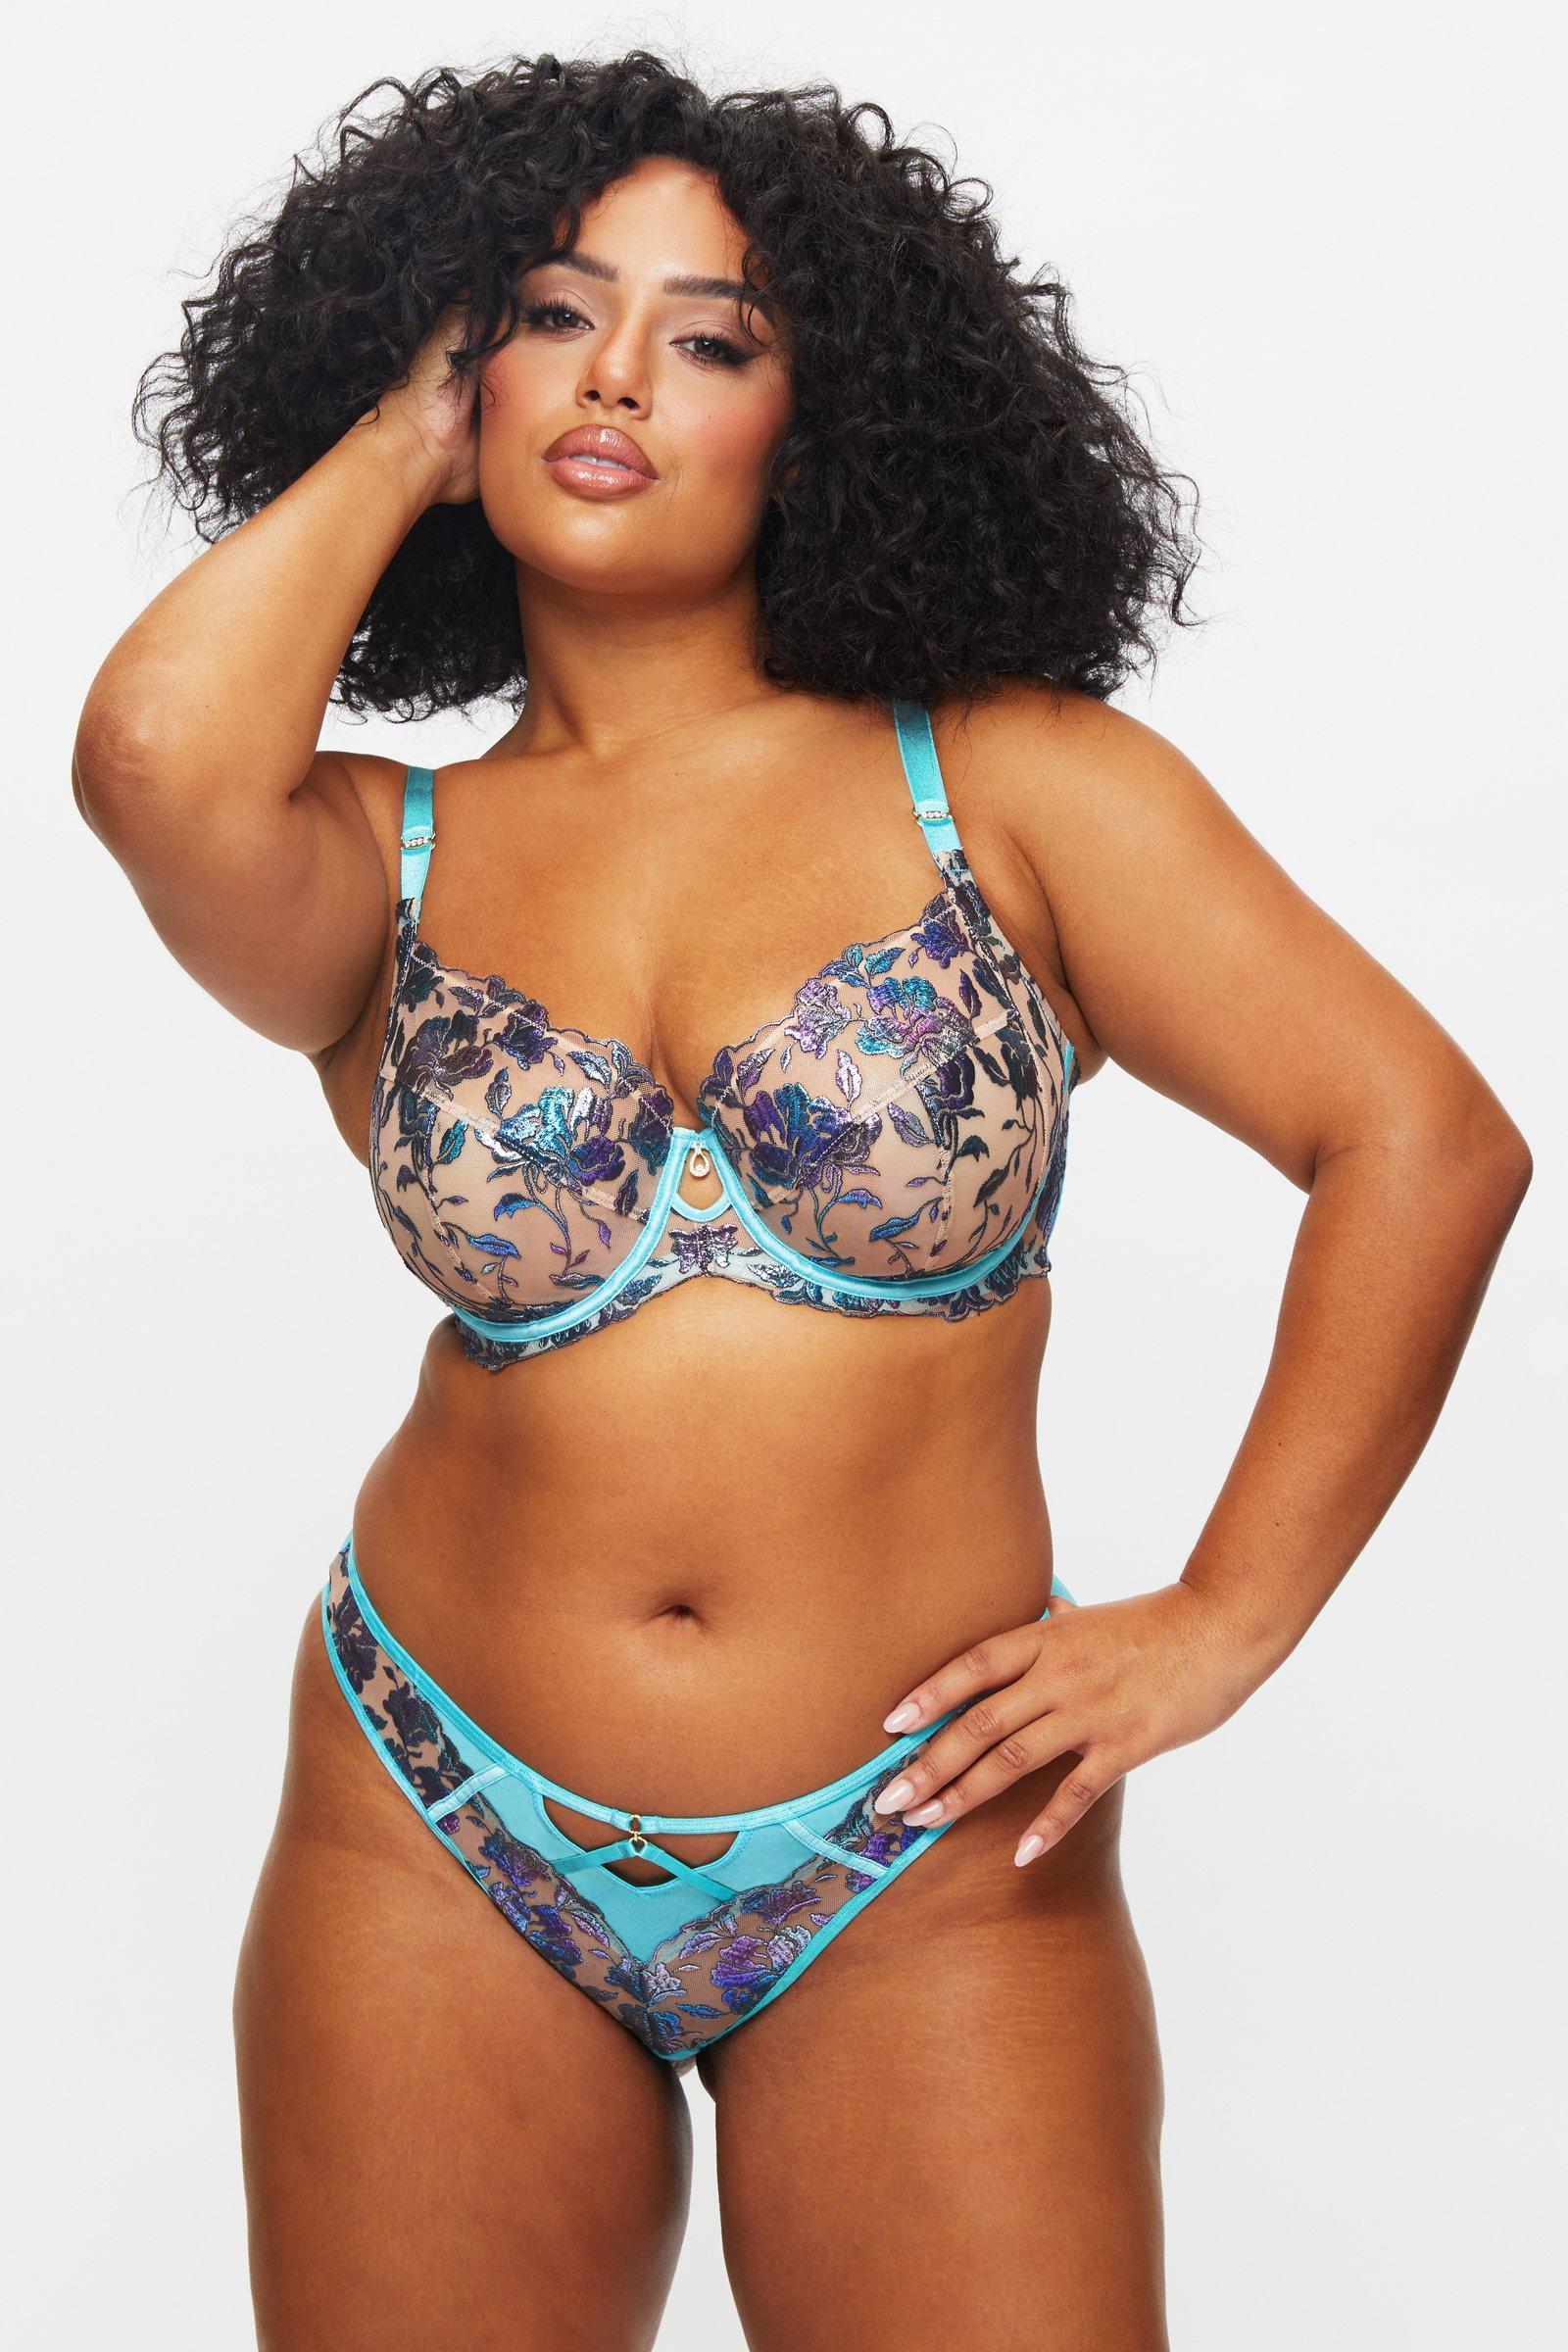 Ann Summers Ambitious non-padded balcony bra with orange floral